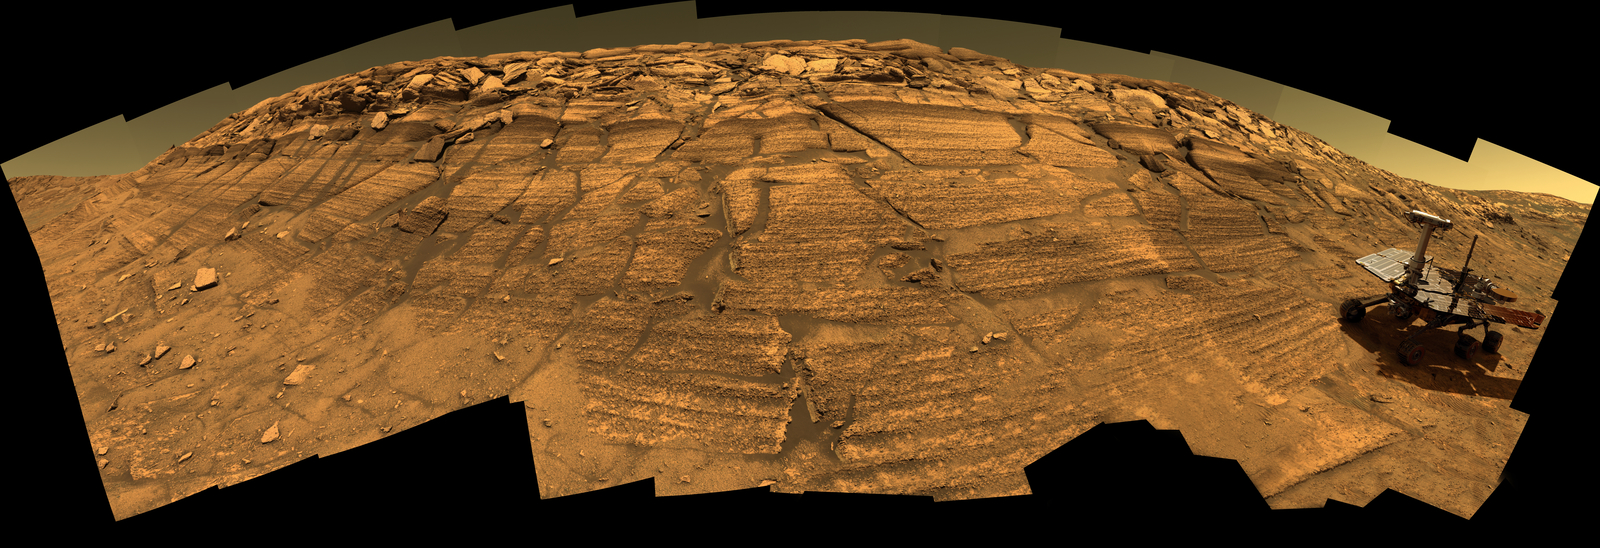 This synthetic image of NASA's Opportunity Mars Exploration Rover inside Endurance Crater was produced using "Virtual Presence in Space" technology.